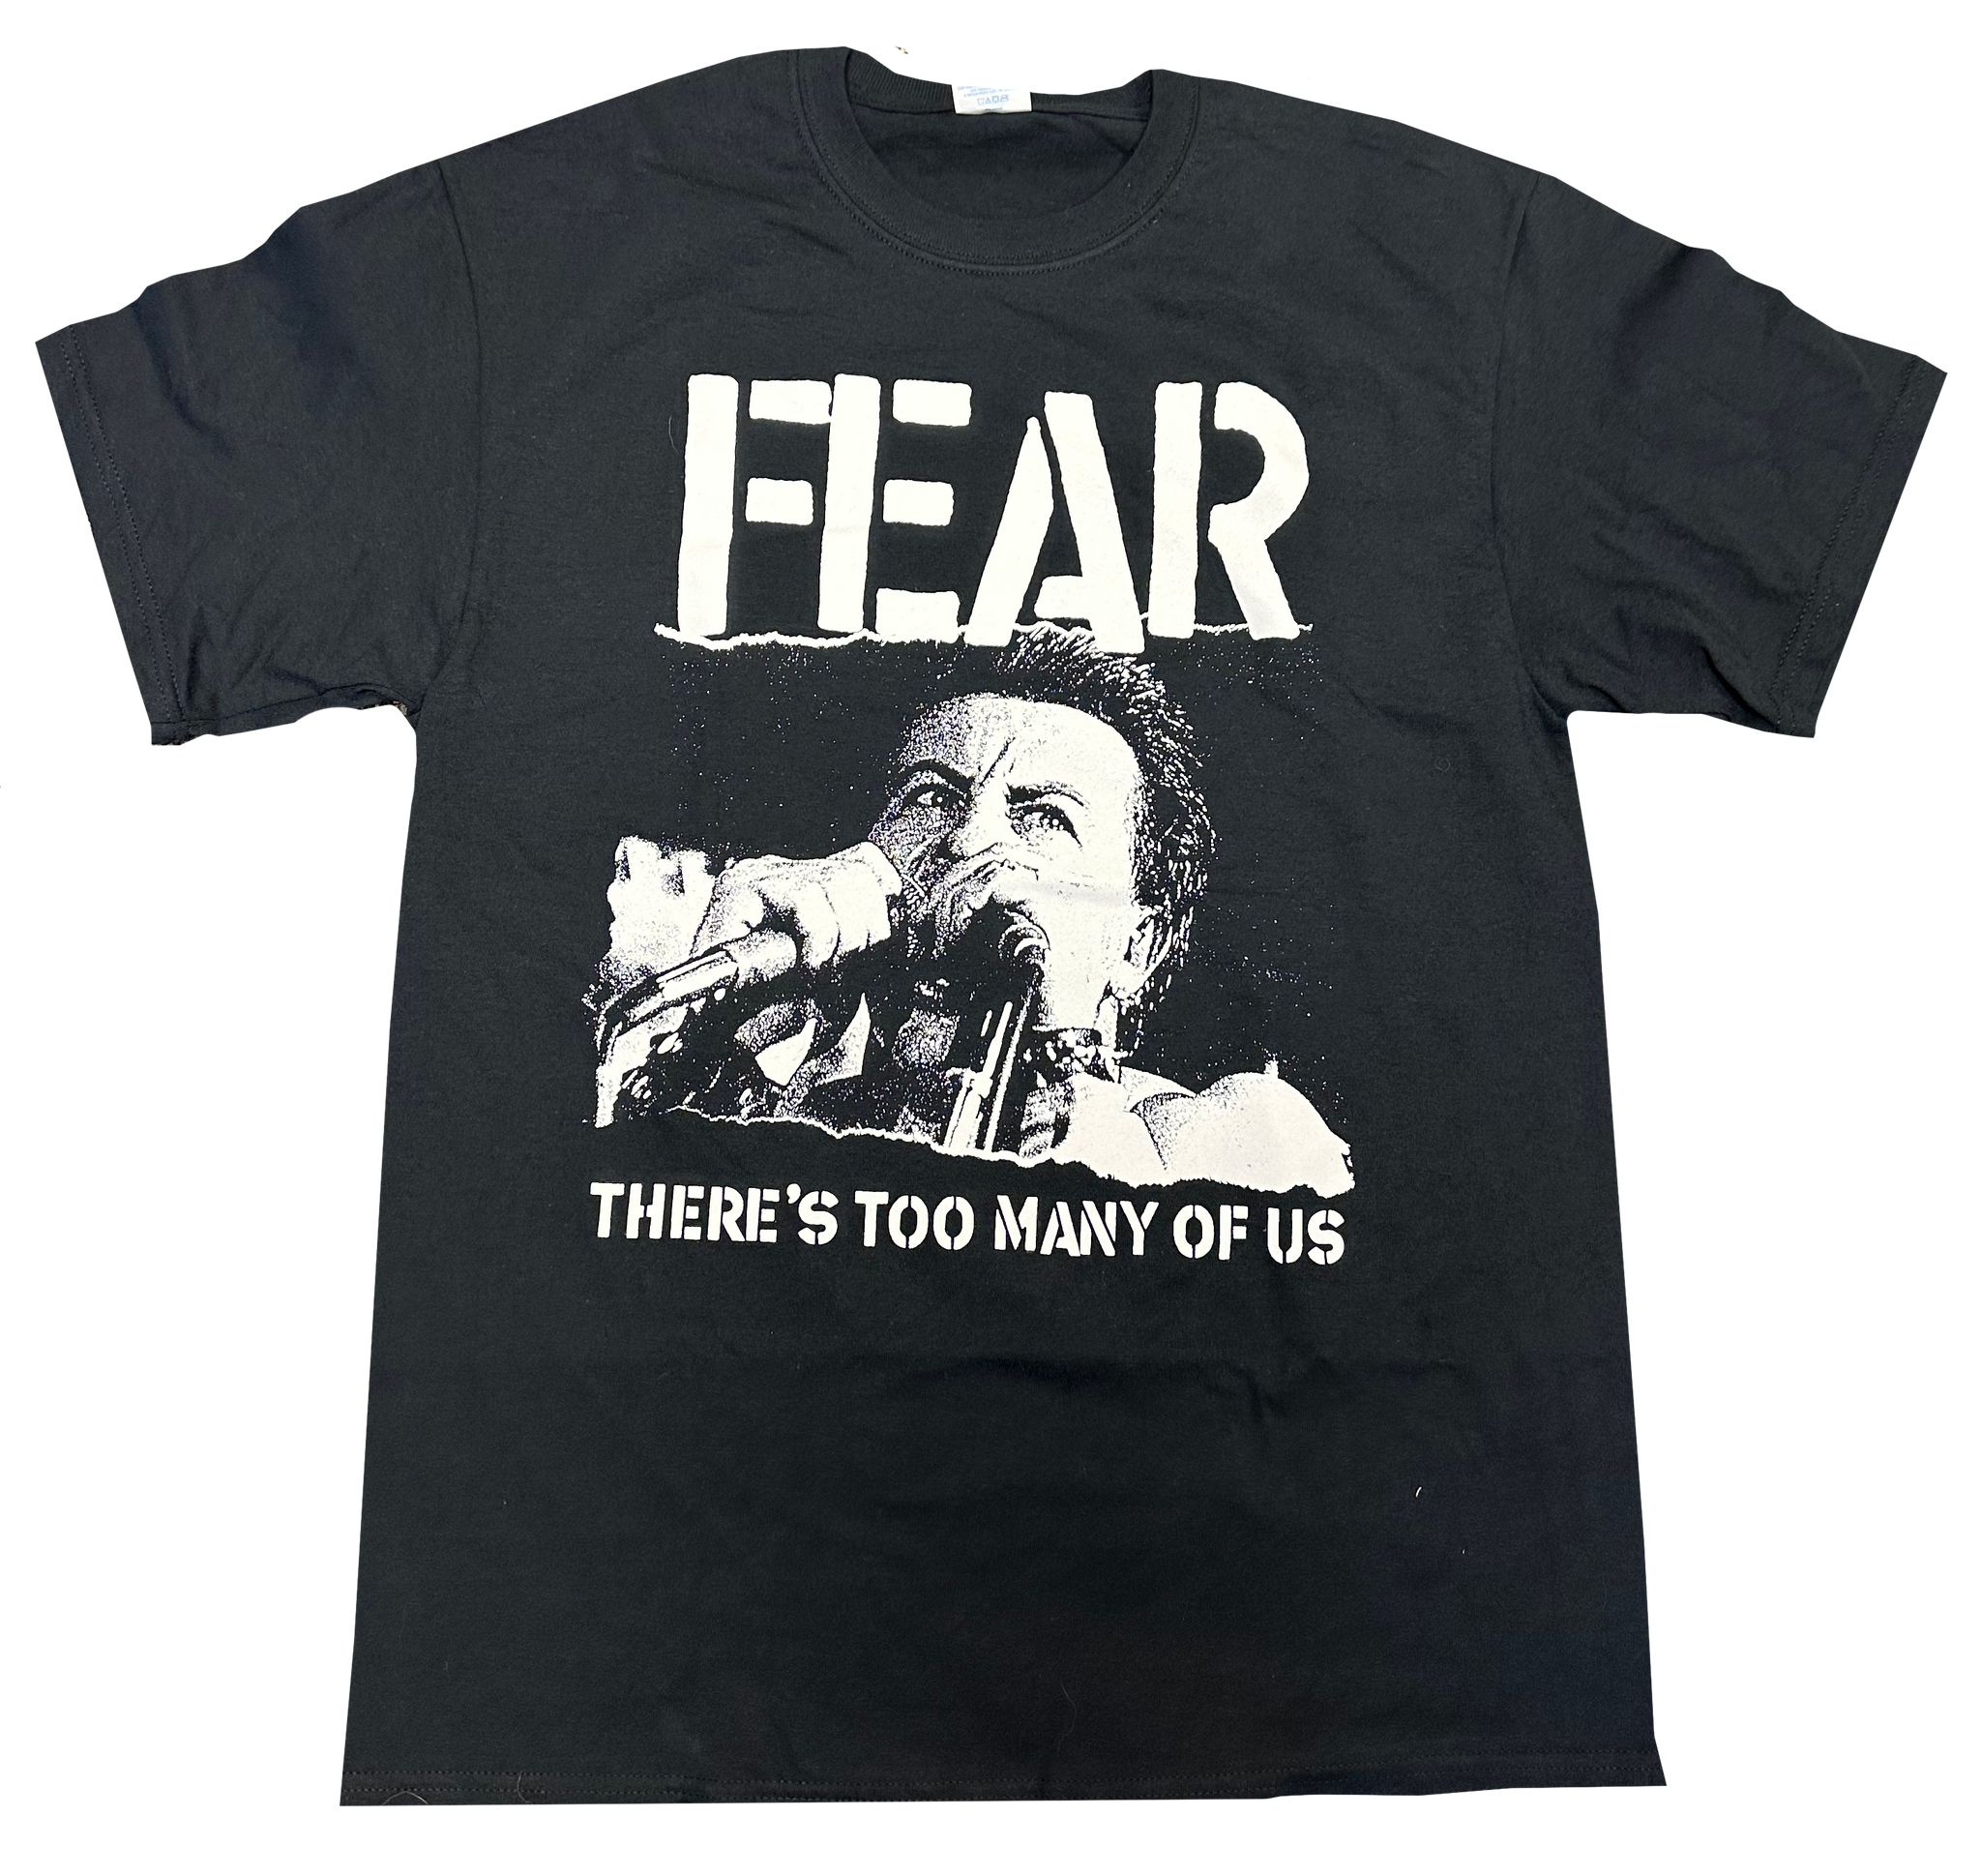 FEAR "THERE'S TOO MANY OF US" T-SHIRT